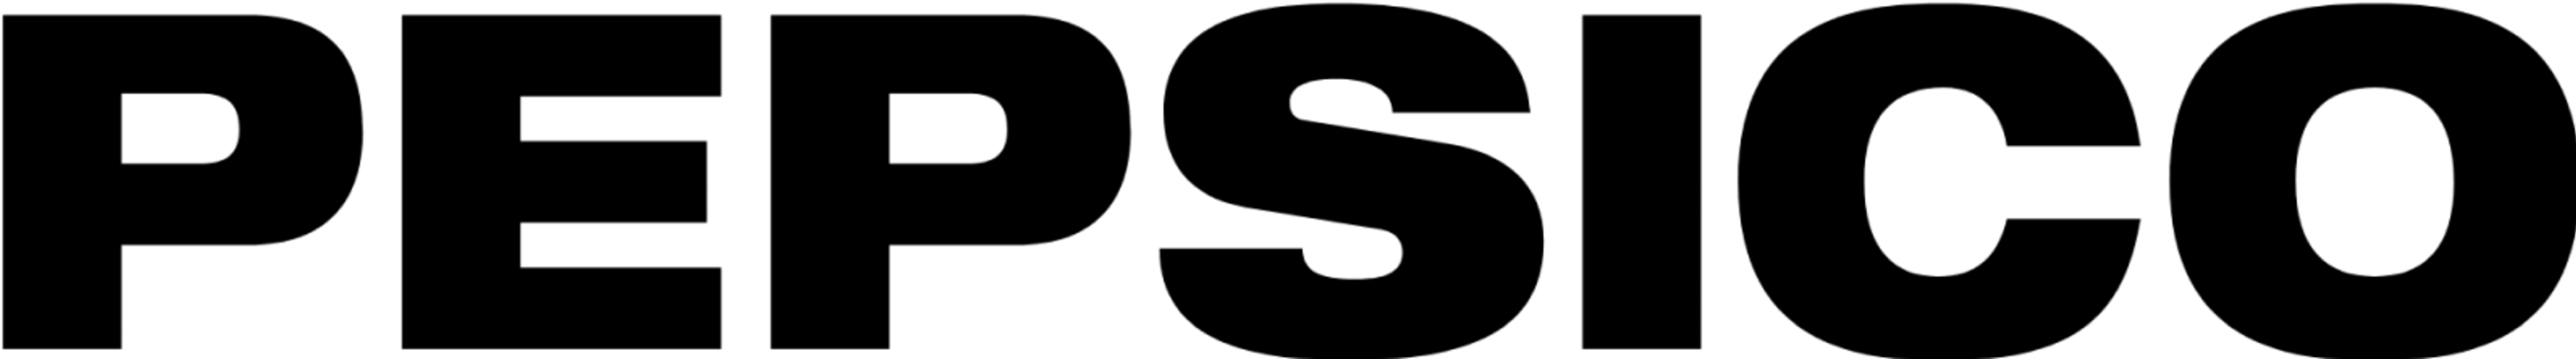 Pepsico logo in black on a transparent background